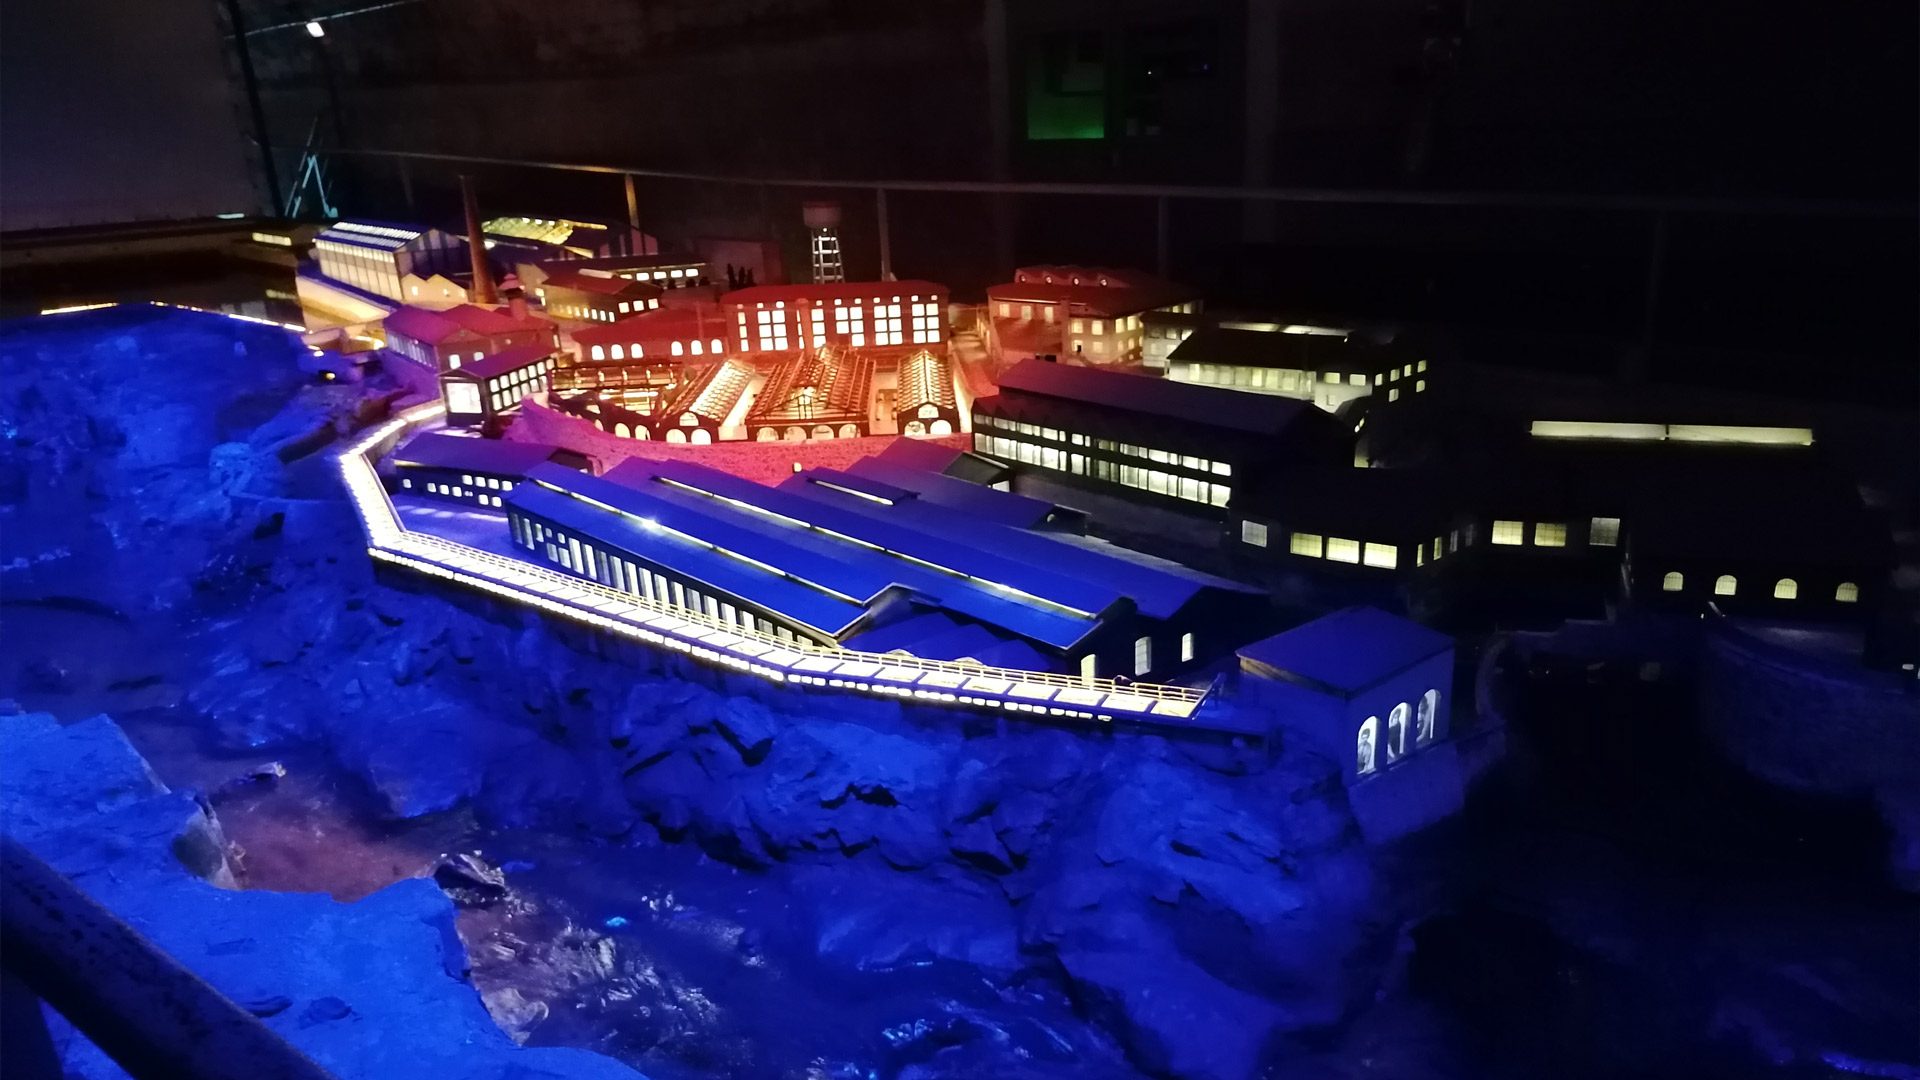 The Saut du Tarn museum - Saint Juéry - the model of the power plant, a sound and light show offered during the visit